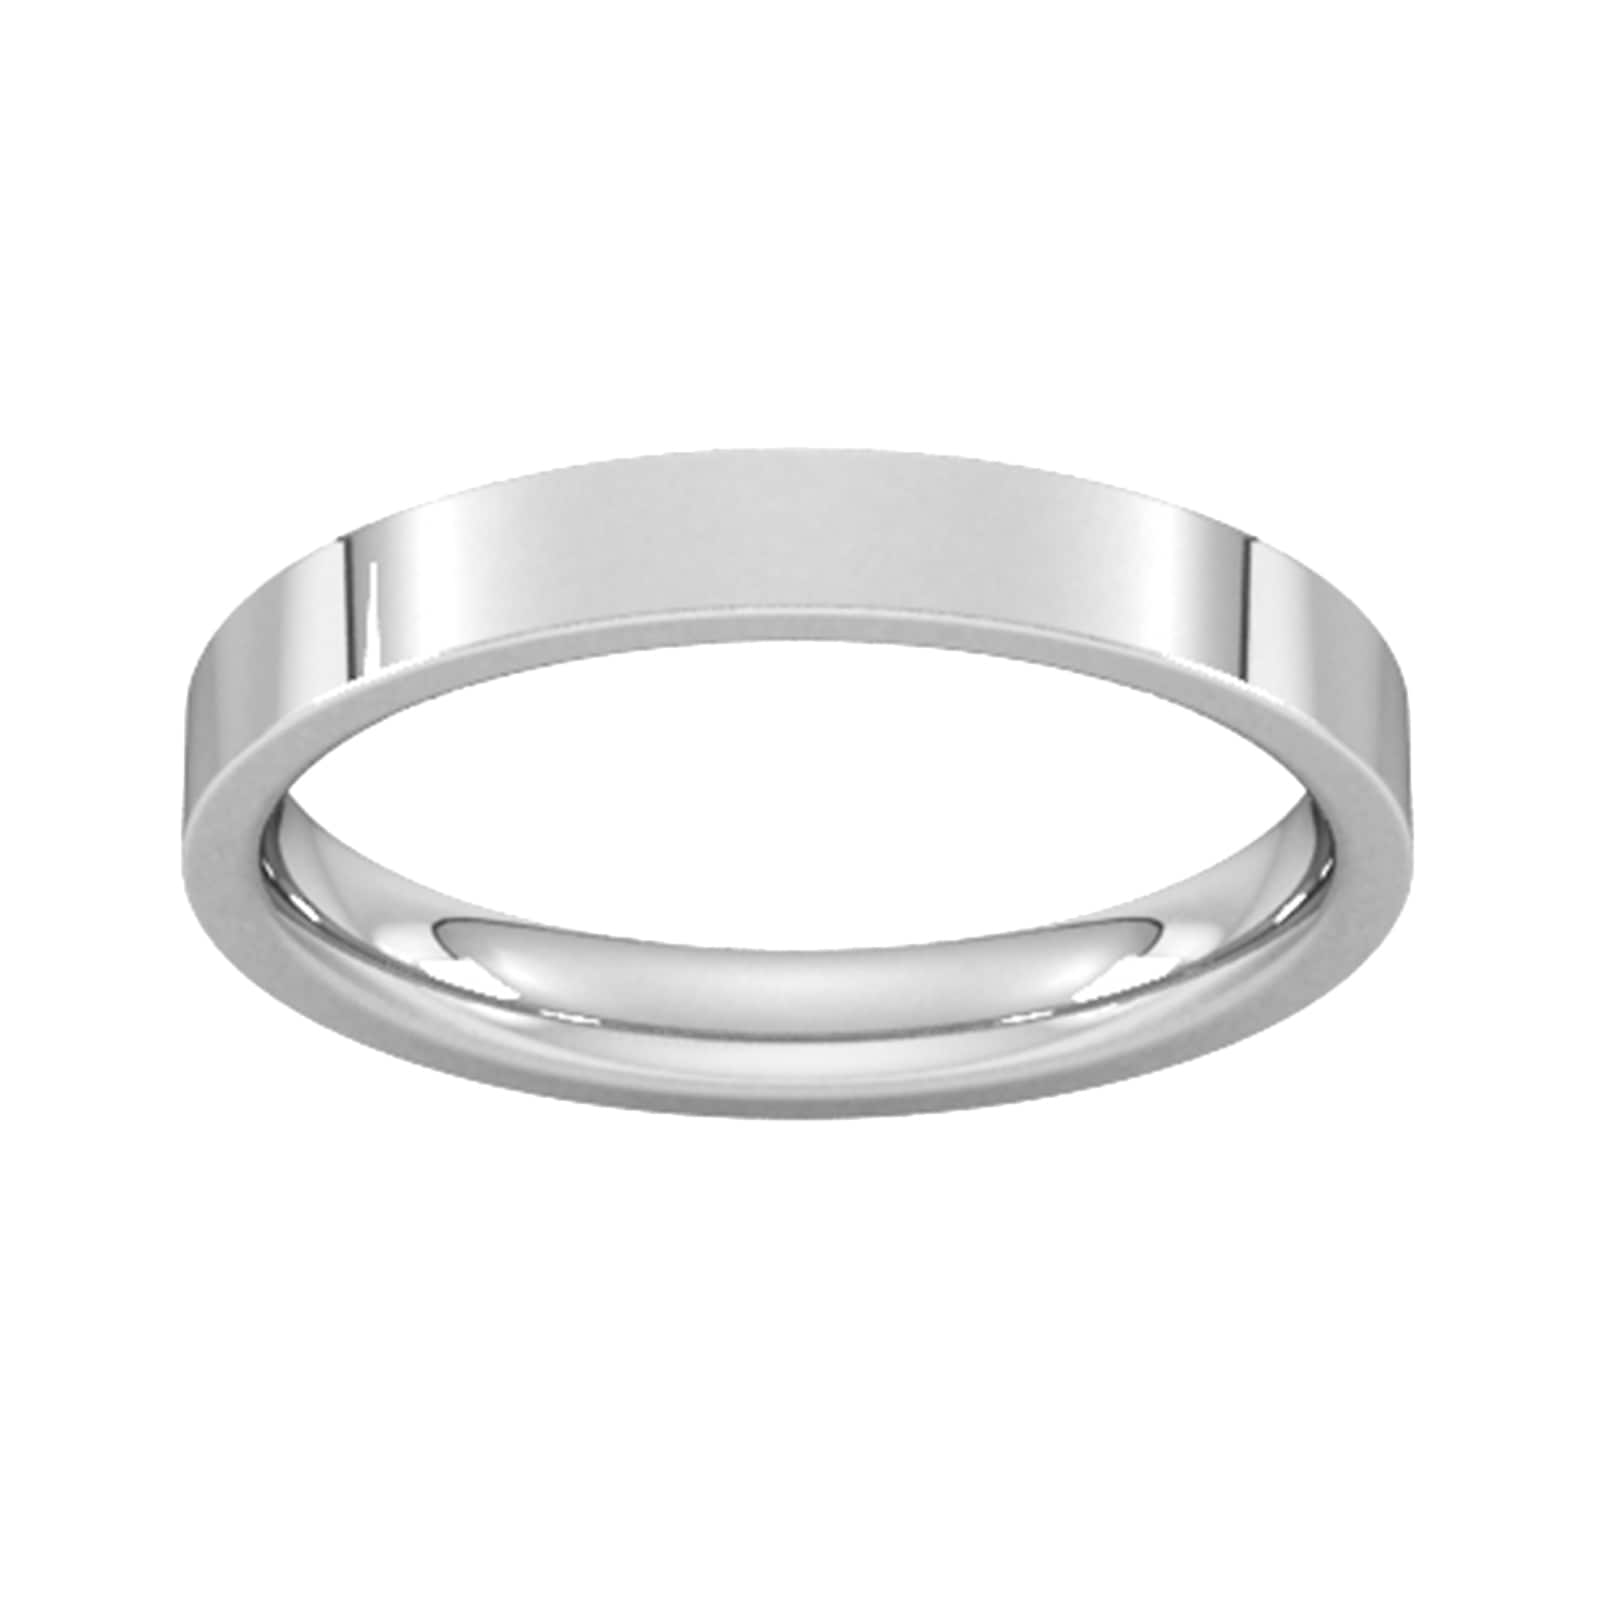 3mm Flat Court Heavy Wedding Ring In 9 Carat White Gold - Ring Size N